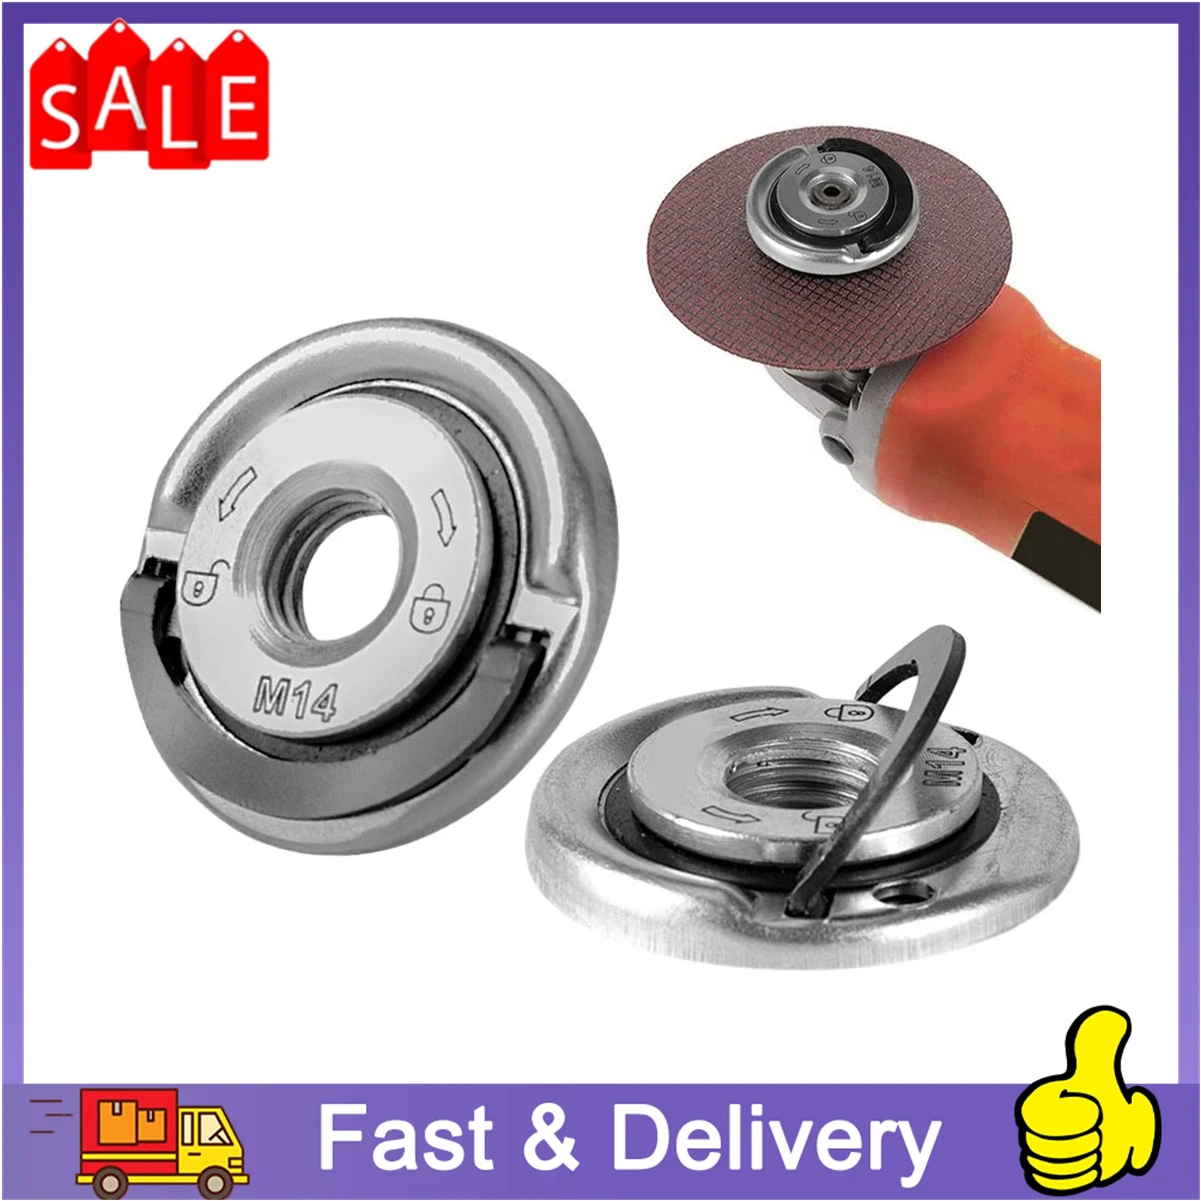 Quick Release Flange Nut M14 Thread Angle Grinder Release Locking Nut Pressing Plate For Angle Grinder Clamping Flange Accessory 2pcs locking plate chuck for m14 angle grinder sds quick release nut clamping top self locking pressure plate top bottom